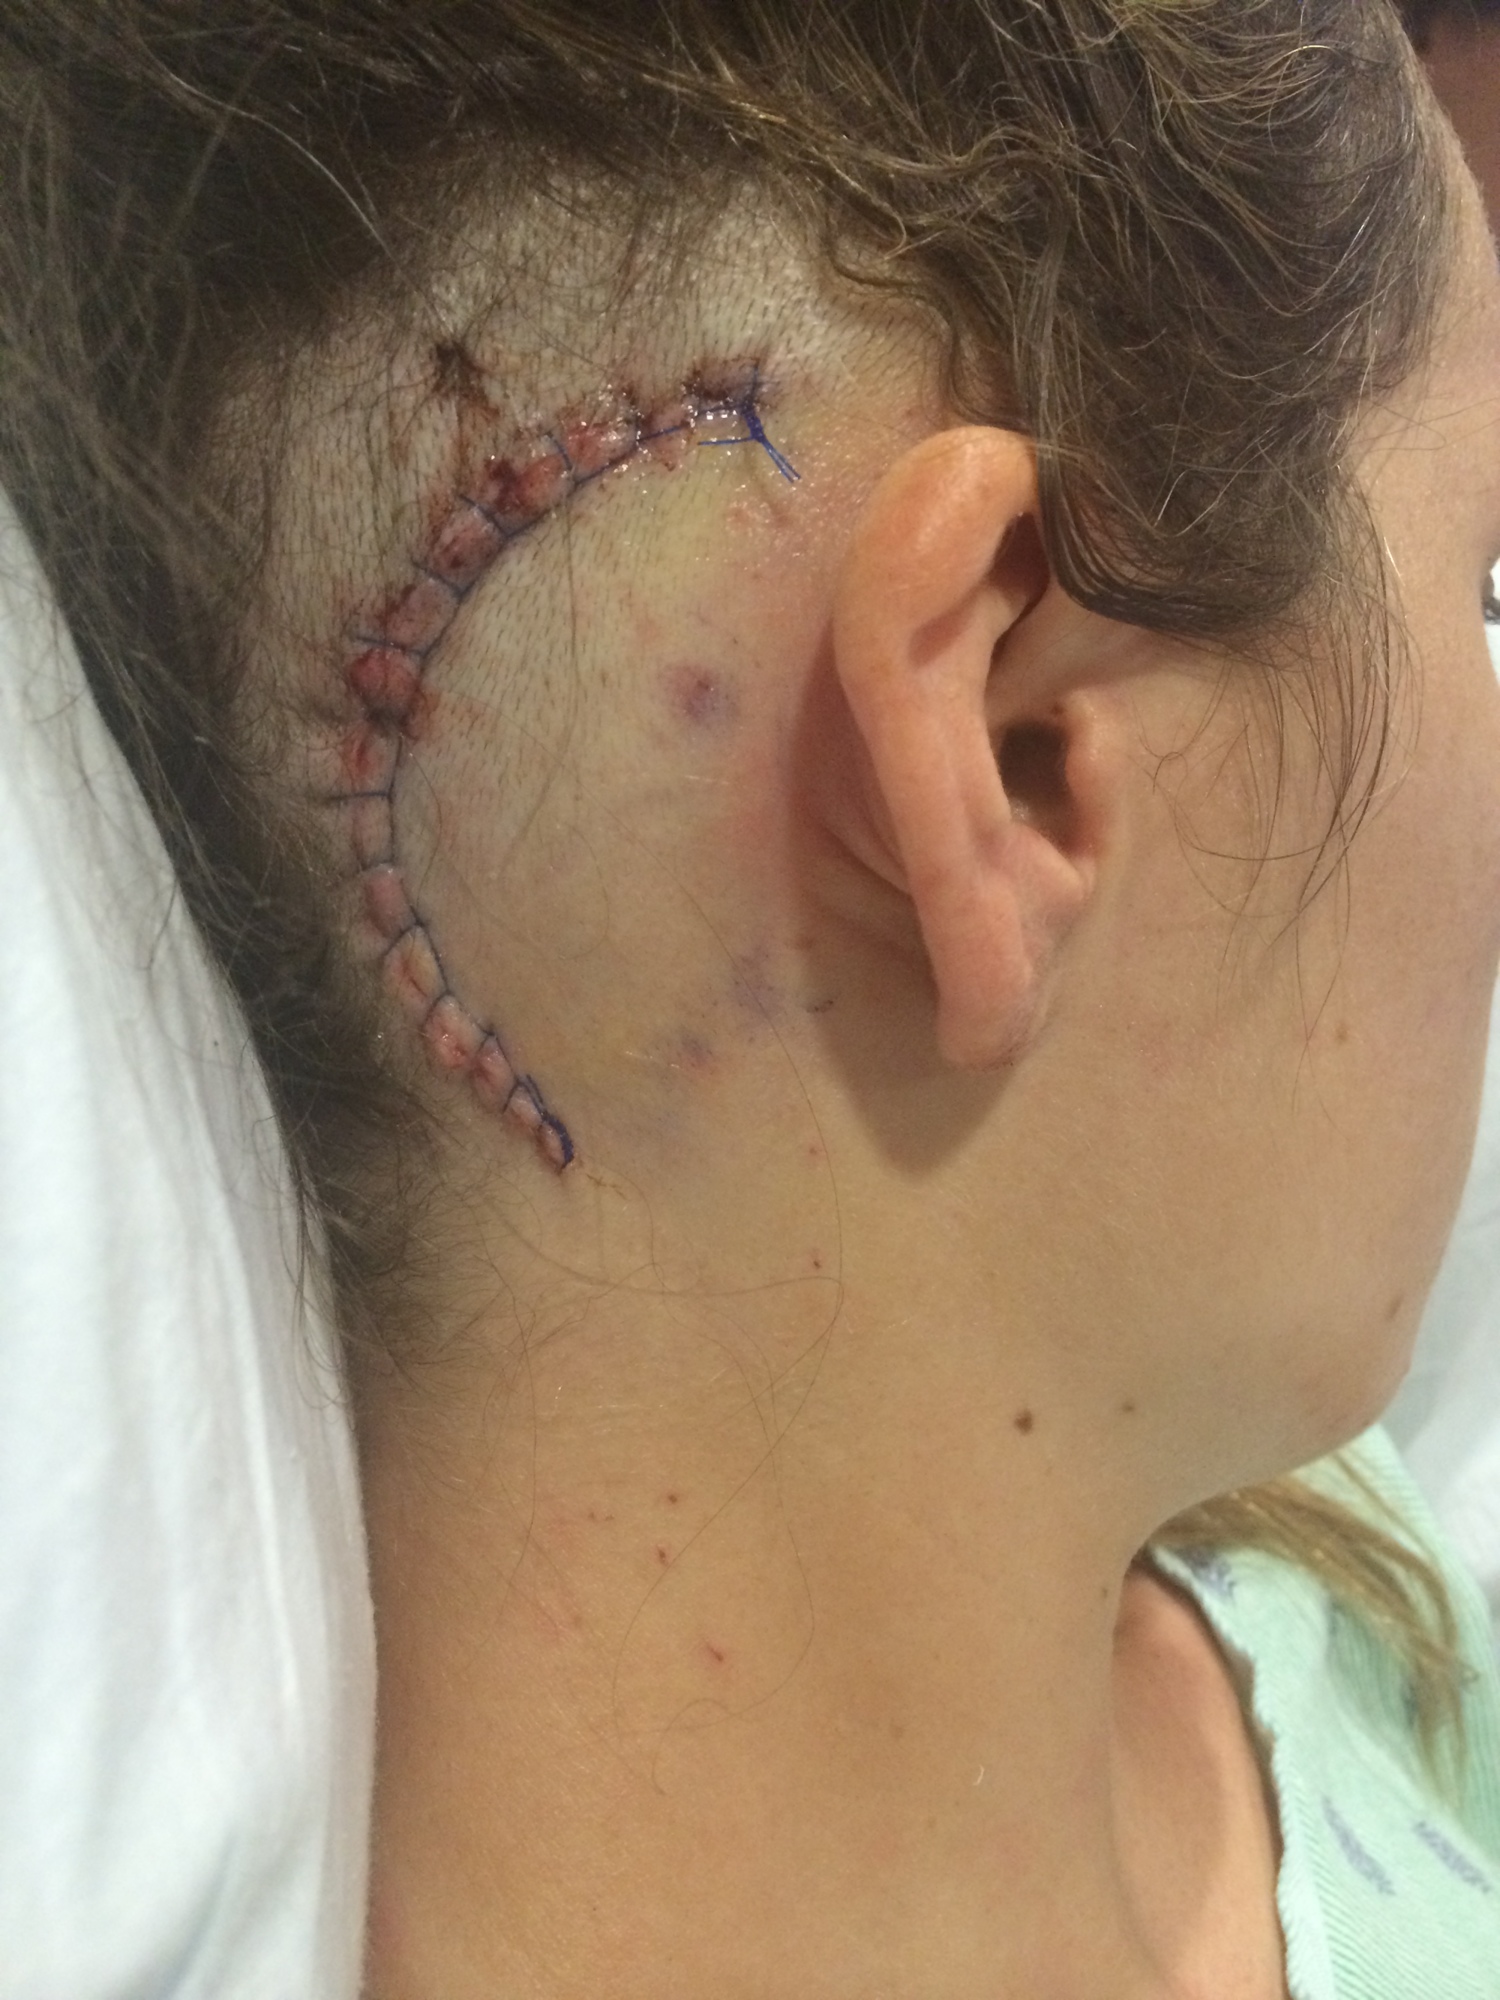 In June of 2014, doctors found a golf-ball sized, benign, brain tumor on her eighth cranial nerve. They used a curved incision to remove 98% of the tumor.